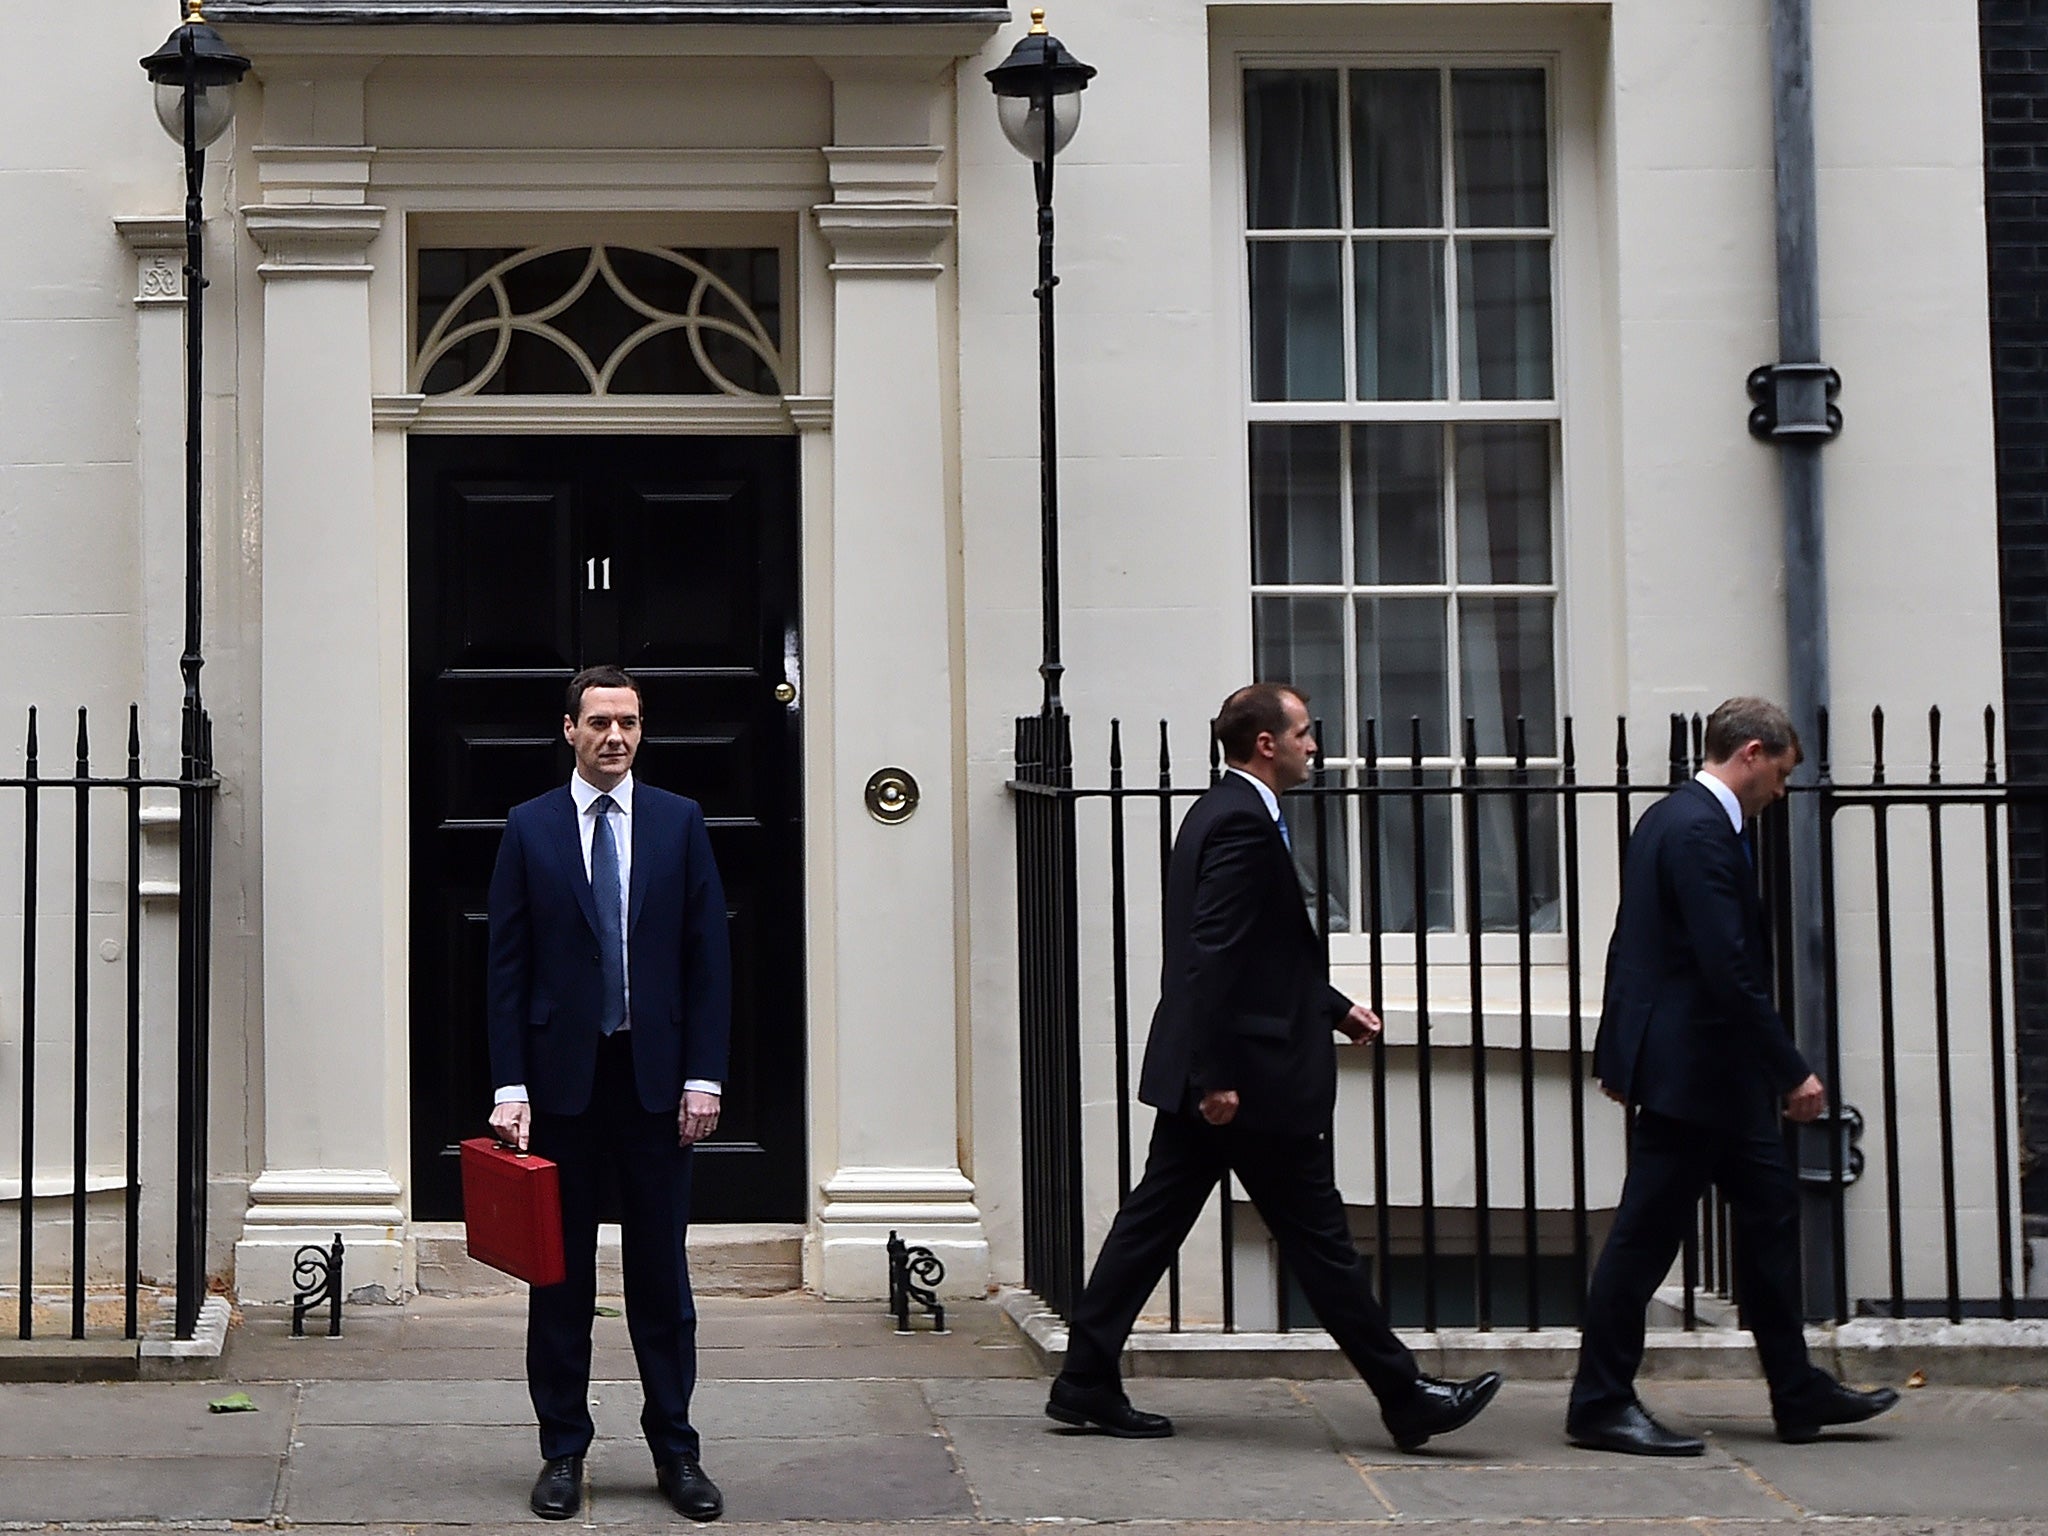 As widely expected, George Osborne has taken an axe to the welfare budget